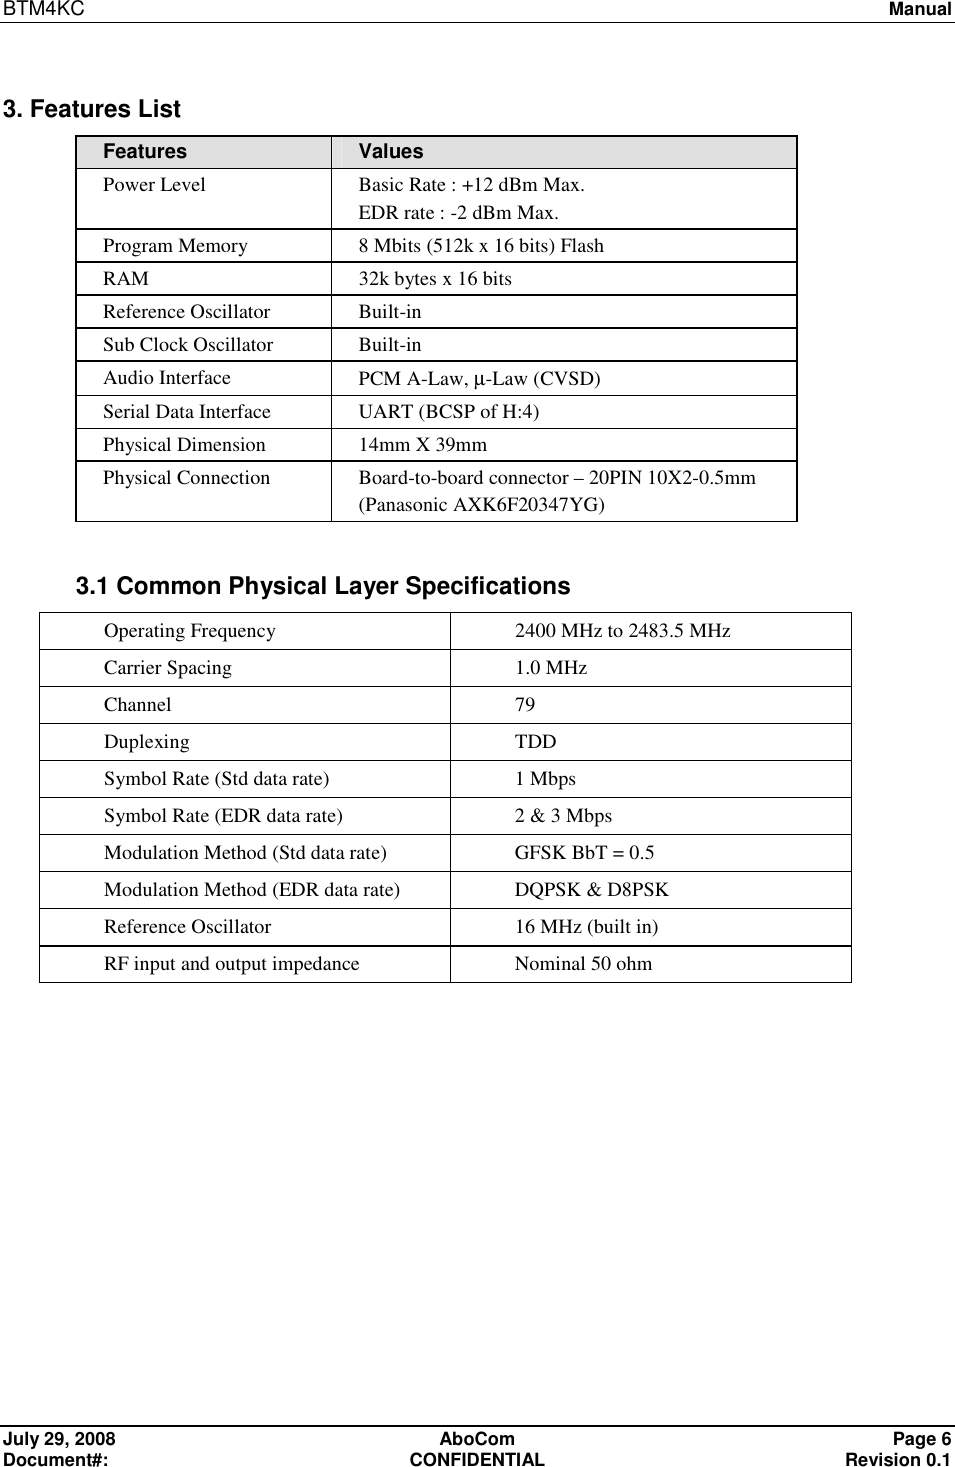 BTM4KC   Manual  July 29, 2008  AboCom  Page 6 Document#:  CONFIDENTIAL  Revision 0.1  3. Features List Features  Values Power Level  Basic Rate : +12 dBm Max. EDR rate : -2 dBm Max. Program Memory  8 Mbits (512k x 16 bits) Flash RAM  32k bytes x 16 bits Reference Oscillator  Built-in Sub Clock Oscillator  Built-in Audio Interface  PCM A-Law, µ-Law (CVSD) Serial Data Interface  UART (BCSP of H:4) Physical Dimension  14mm X 39mm Physical Connection  Board-to-board connector – 20PIN 10X2-0.5mm        (Panasonic AXK6F20347YG)  3.1 Common Physical Layer Specifications Operating Frequency  2400 MHz to 2483.5 MHz Carrier Spacing  1.0 MHz Channel  79  Duplexing  TDD Symbol Rate (Std data rate)  1 Mbps Symbol Rate (EDR data rate)  2 &amp; 3 Mbps Modulation Method (Std data rate)  GFSK BbT = 0.5 Modulation Method (EDR data rate)  DQPSK &amp; D8PSK Reference Oscillator  16 MHz (built in) RF input and output impedance  Nominal 50 ohm   